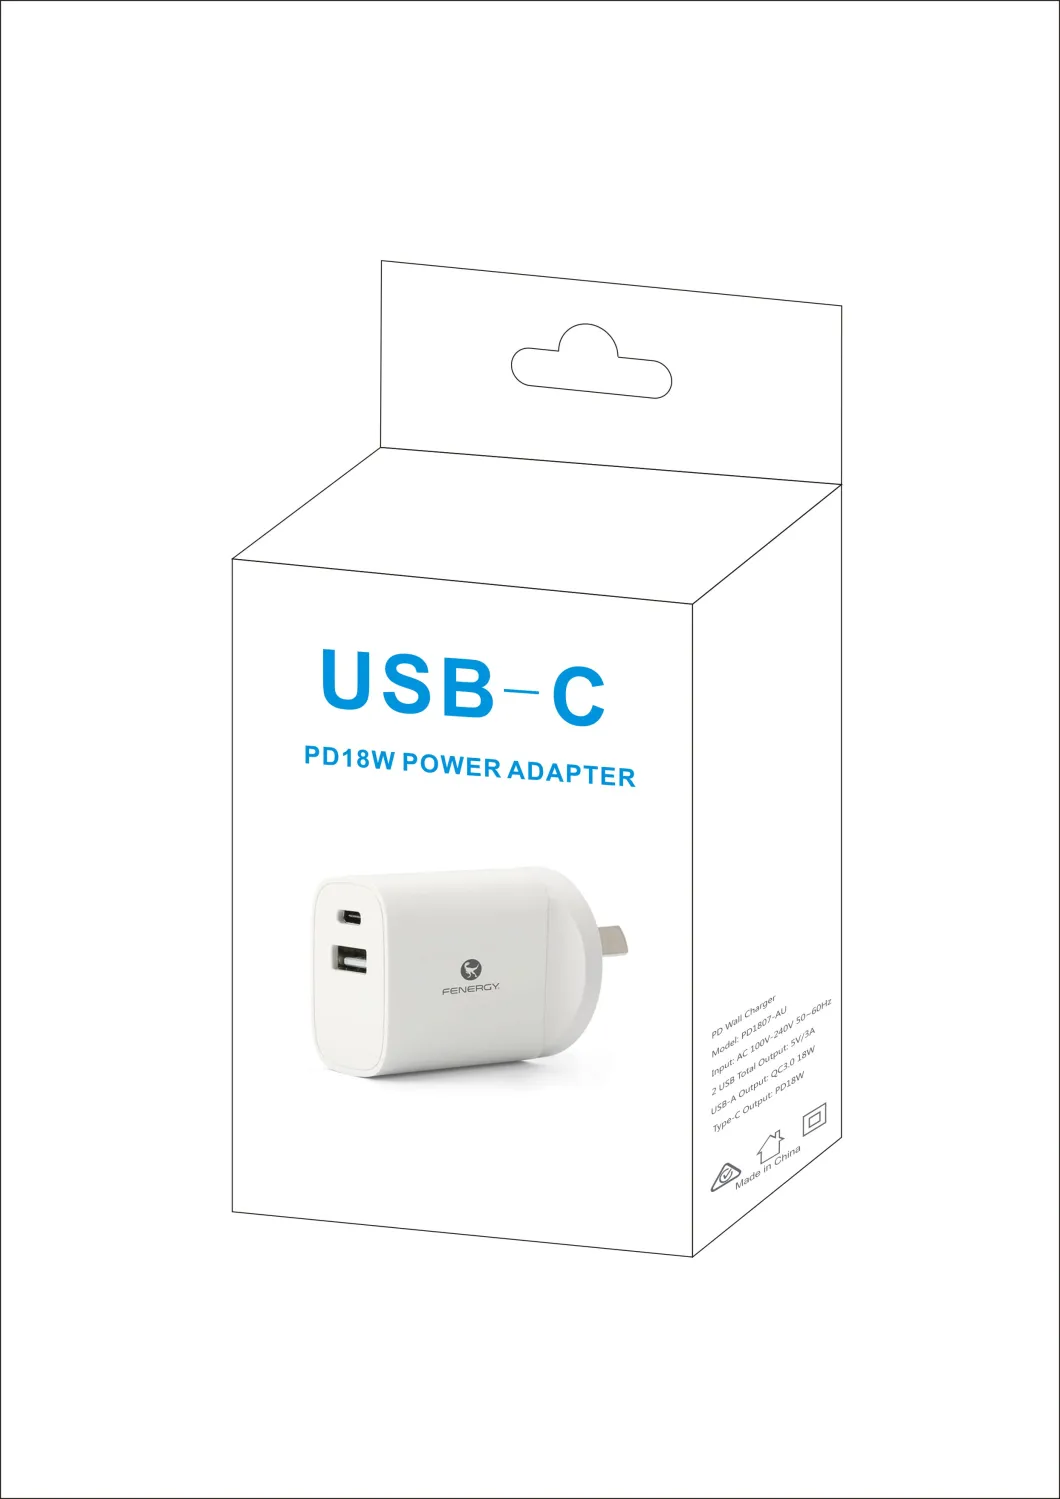 USB-C 18W Type-C Pd Charger Power Adapter Charger with Quick Charging Function for iPhone